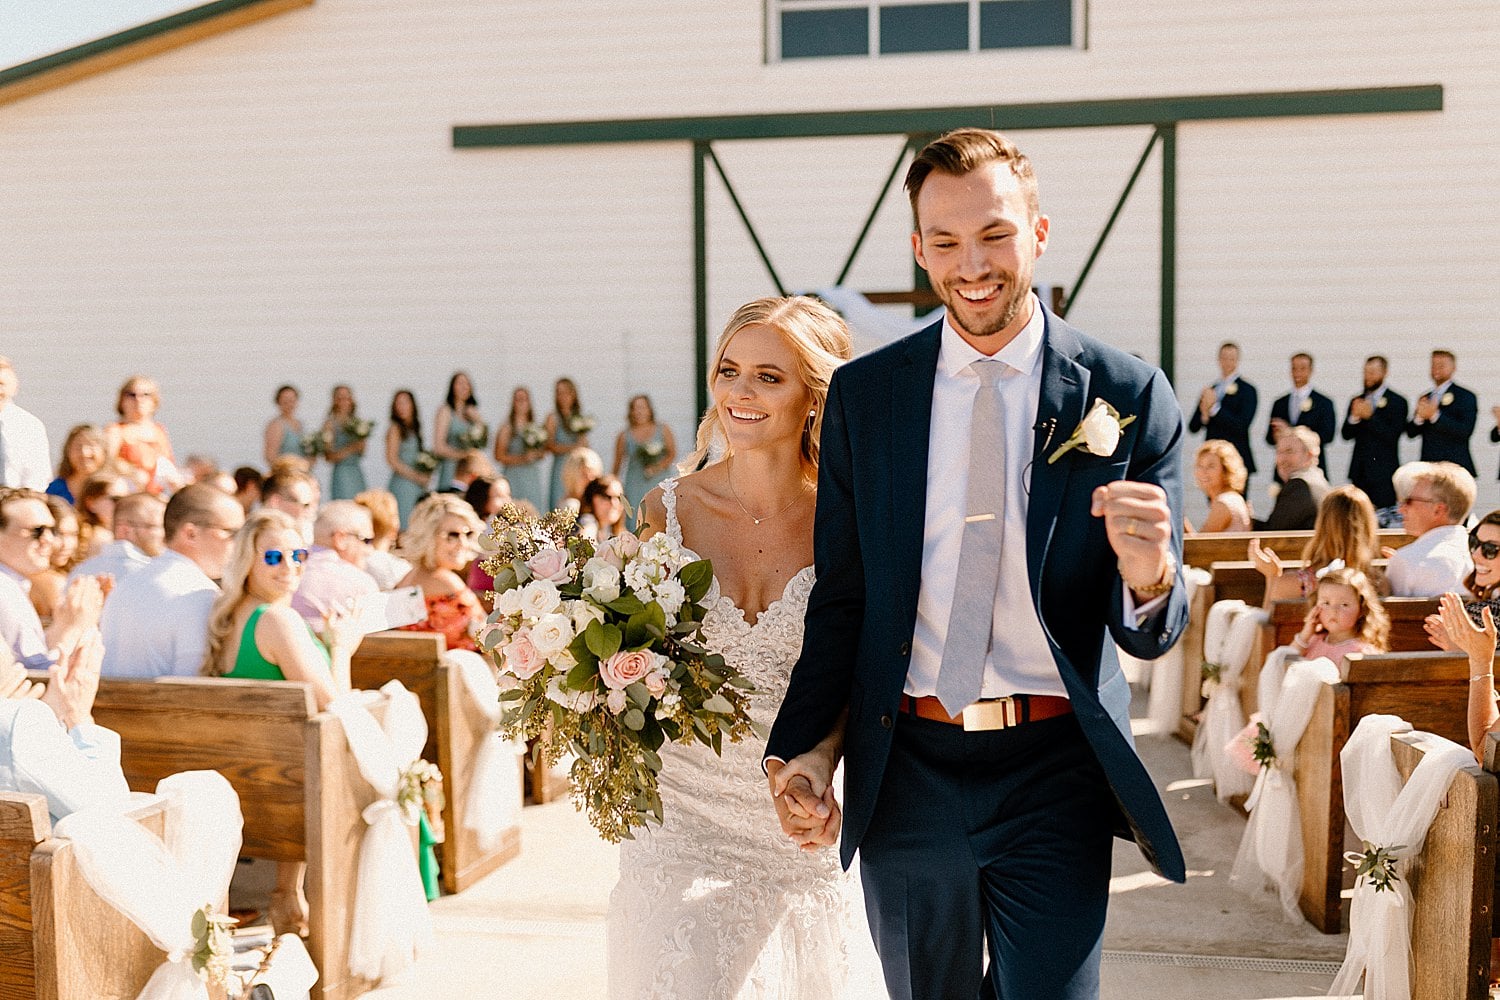 A bride and groom leaving their wedding ceremony at The Butler Barn.